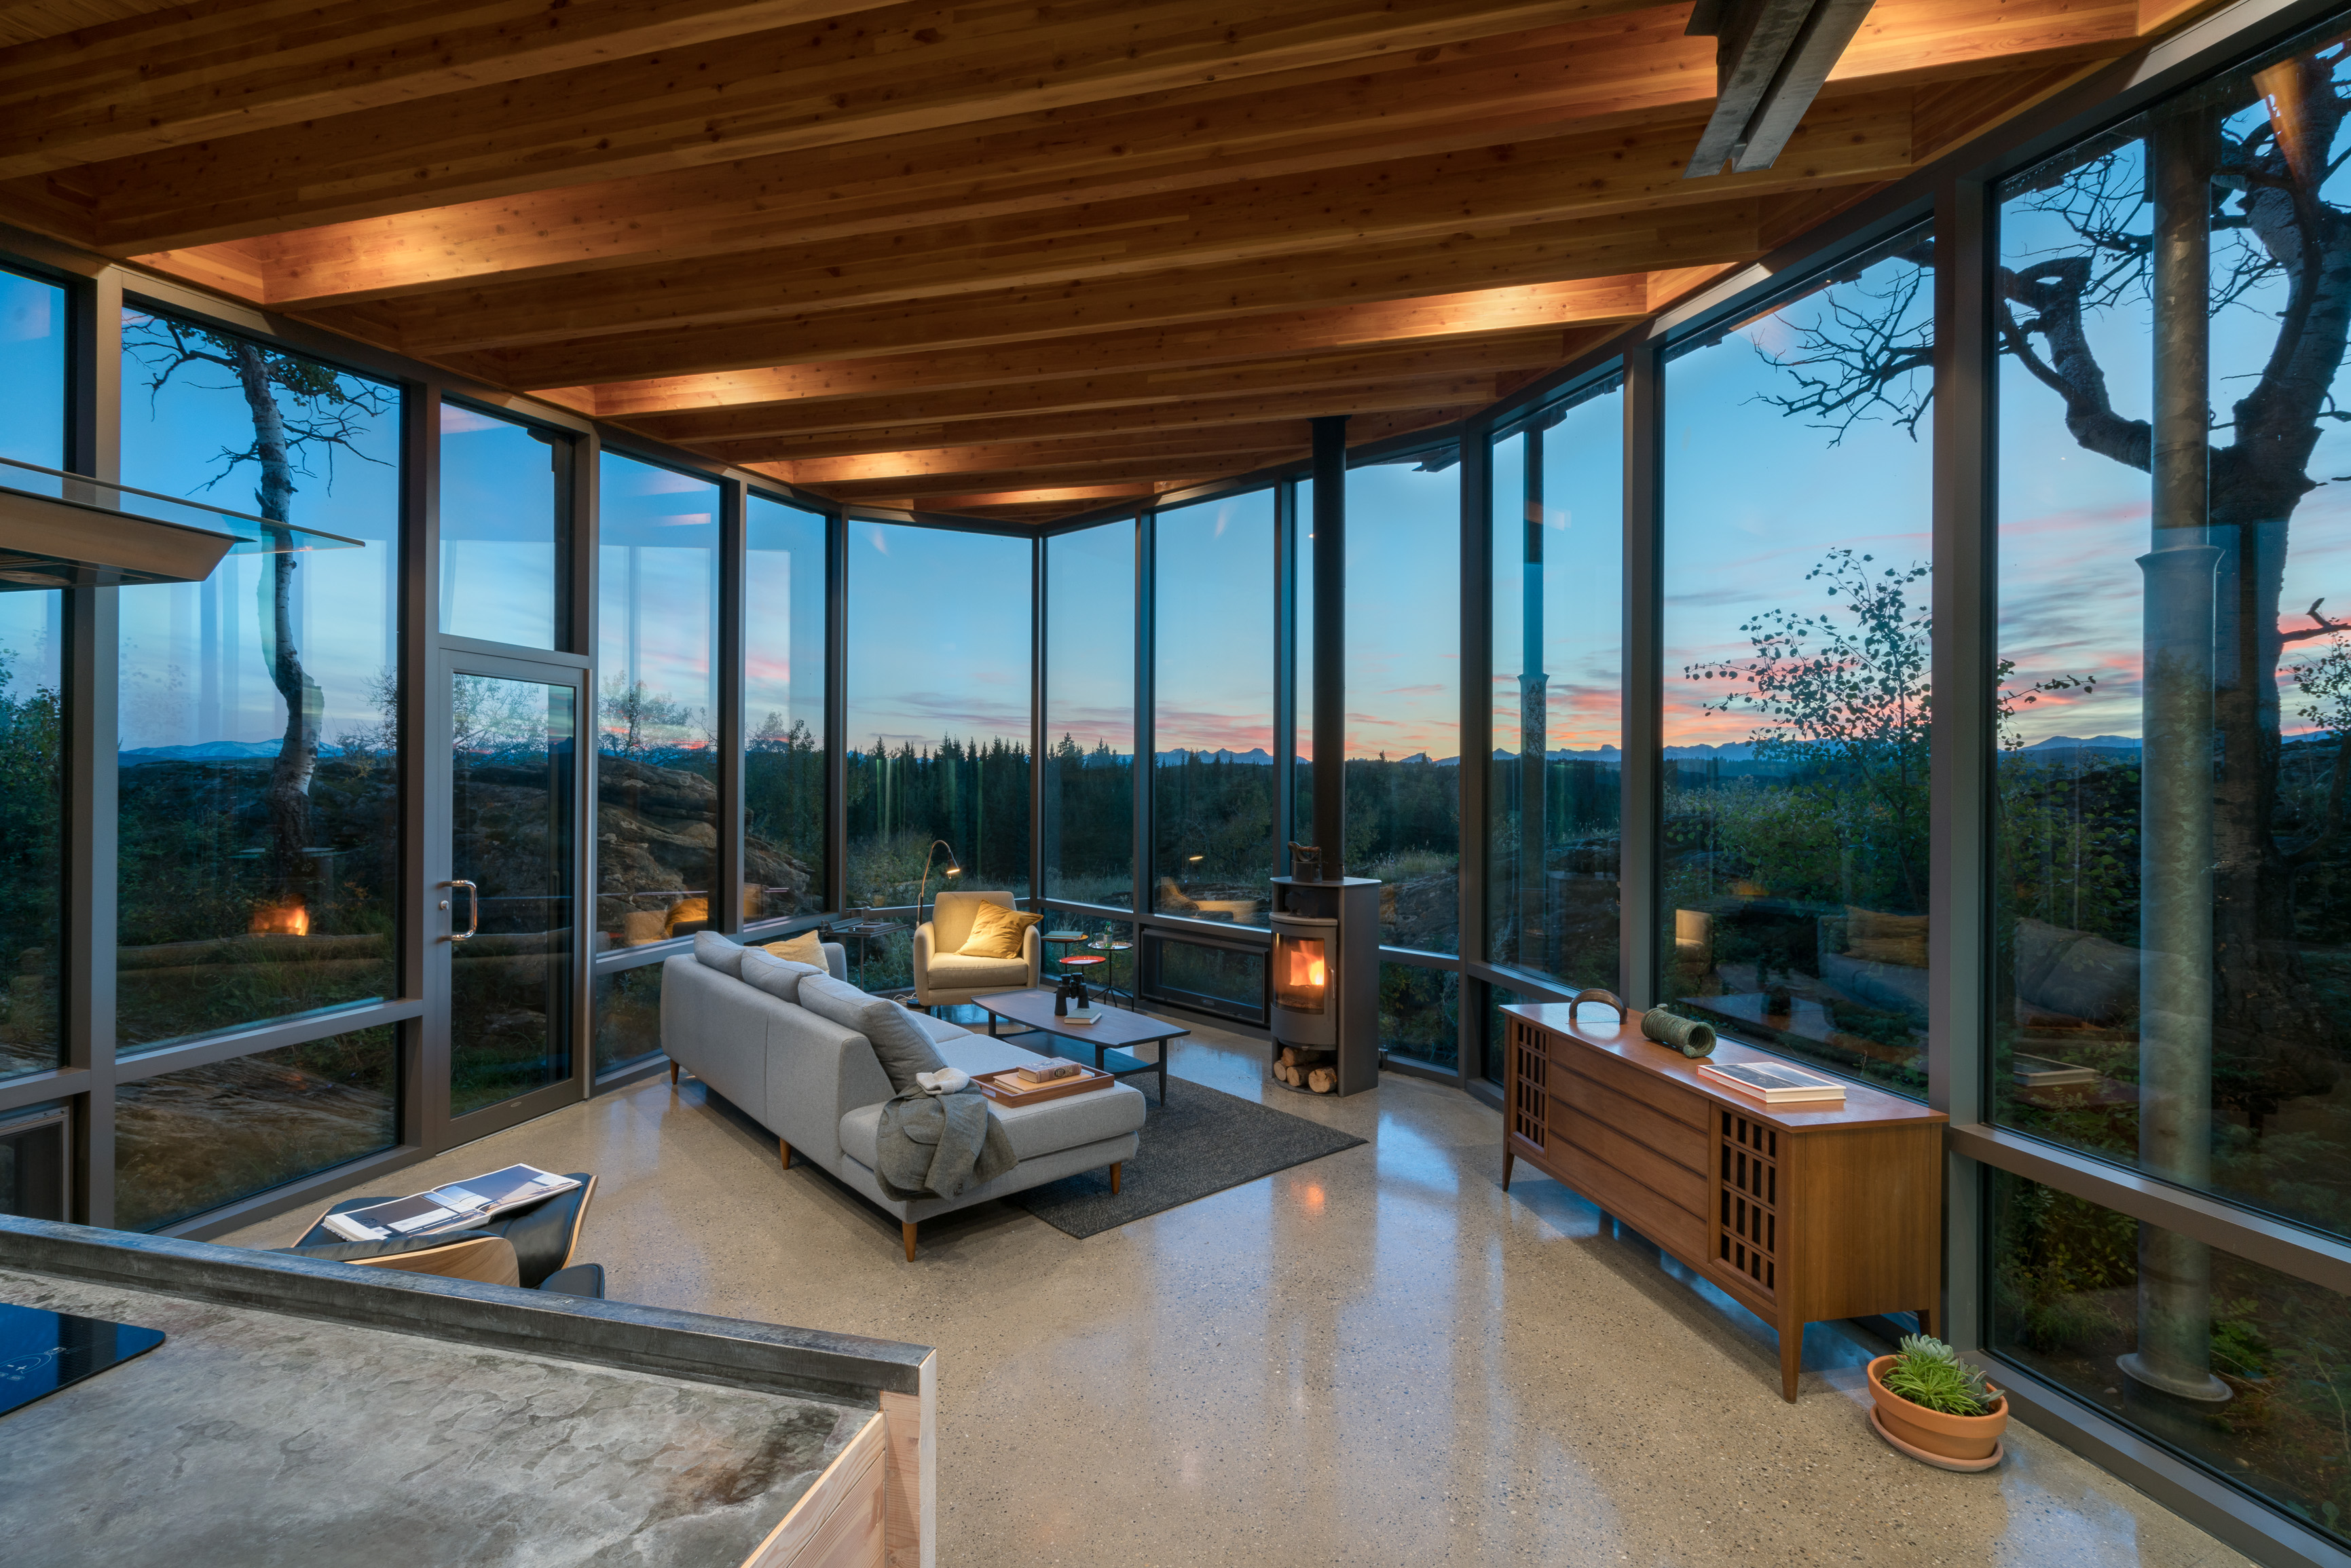 The glass wall of the living room of the Rock House was designed by James Cutler to perfectly follows the natural rock outcropping.